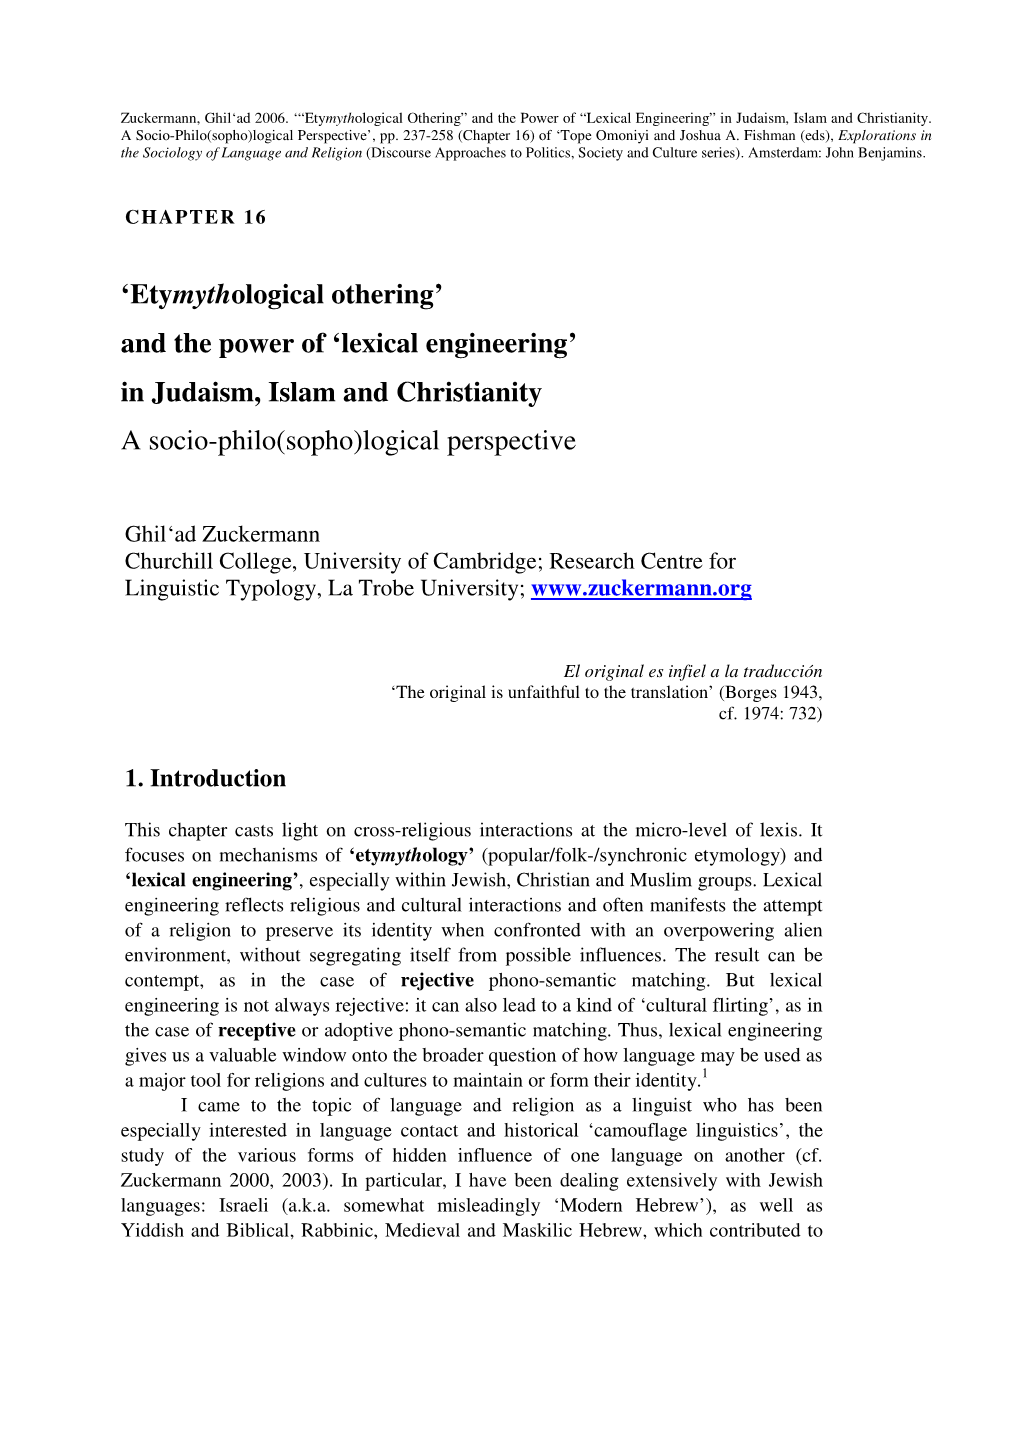 Lexical Engineering” in Judaism, Islam and Christianity